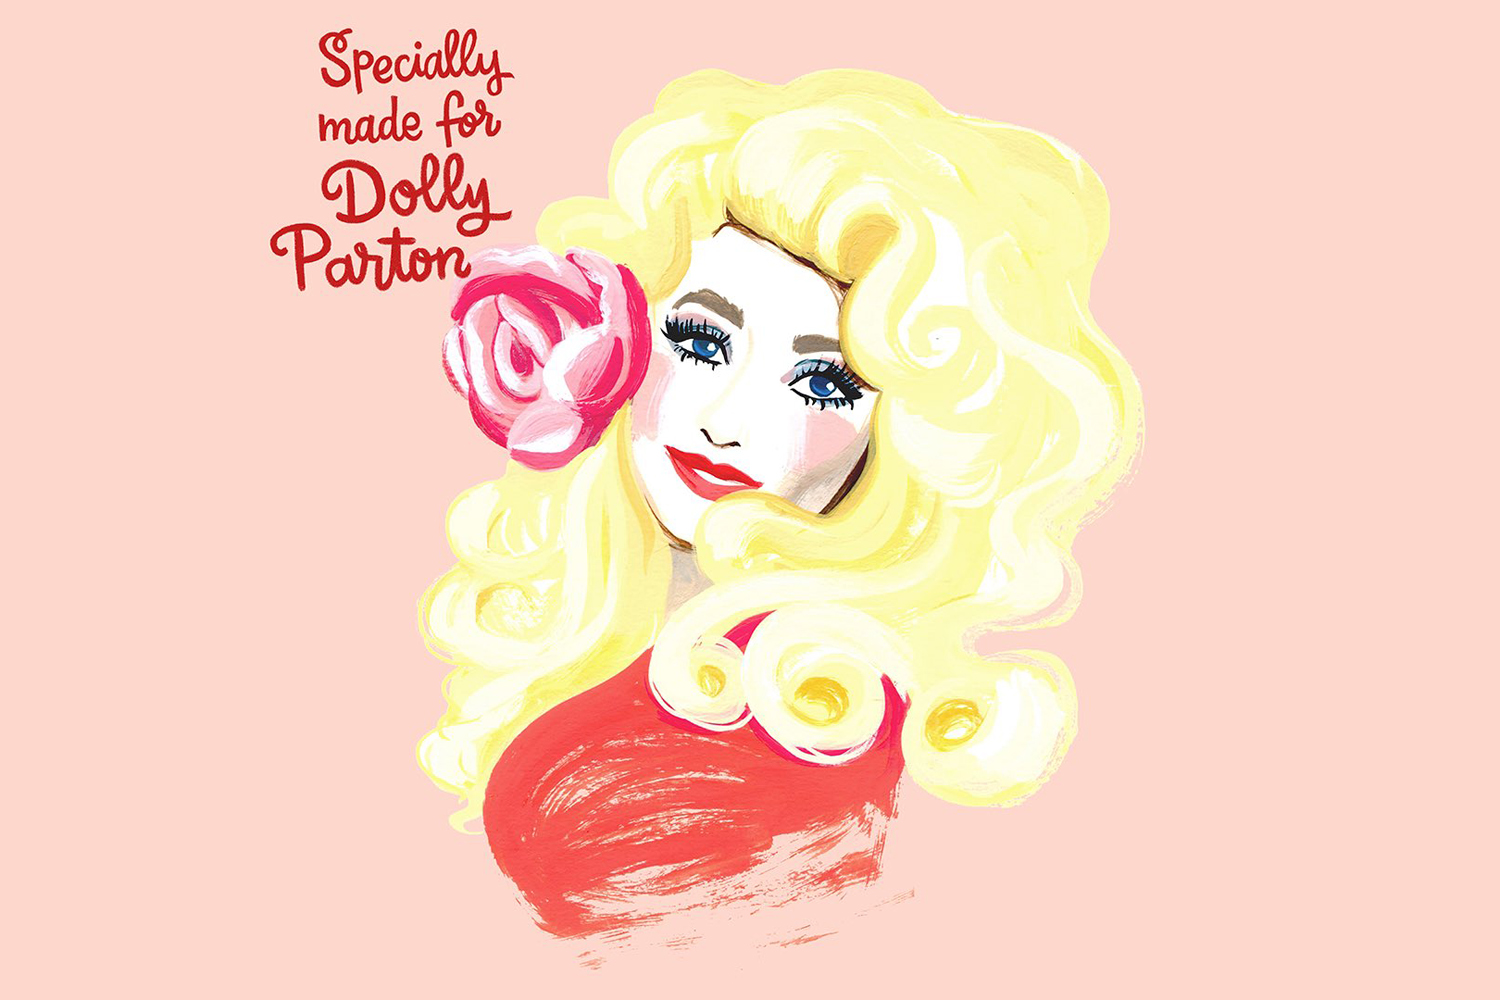 Dolly Parton Collab With Jeni's Crashes Site.